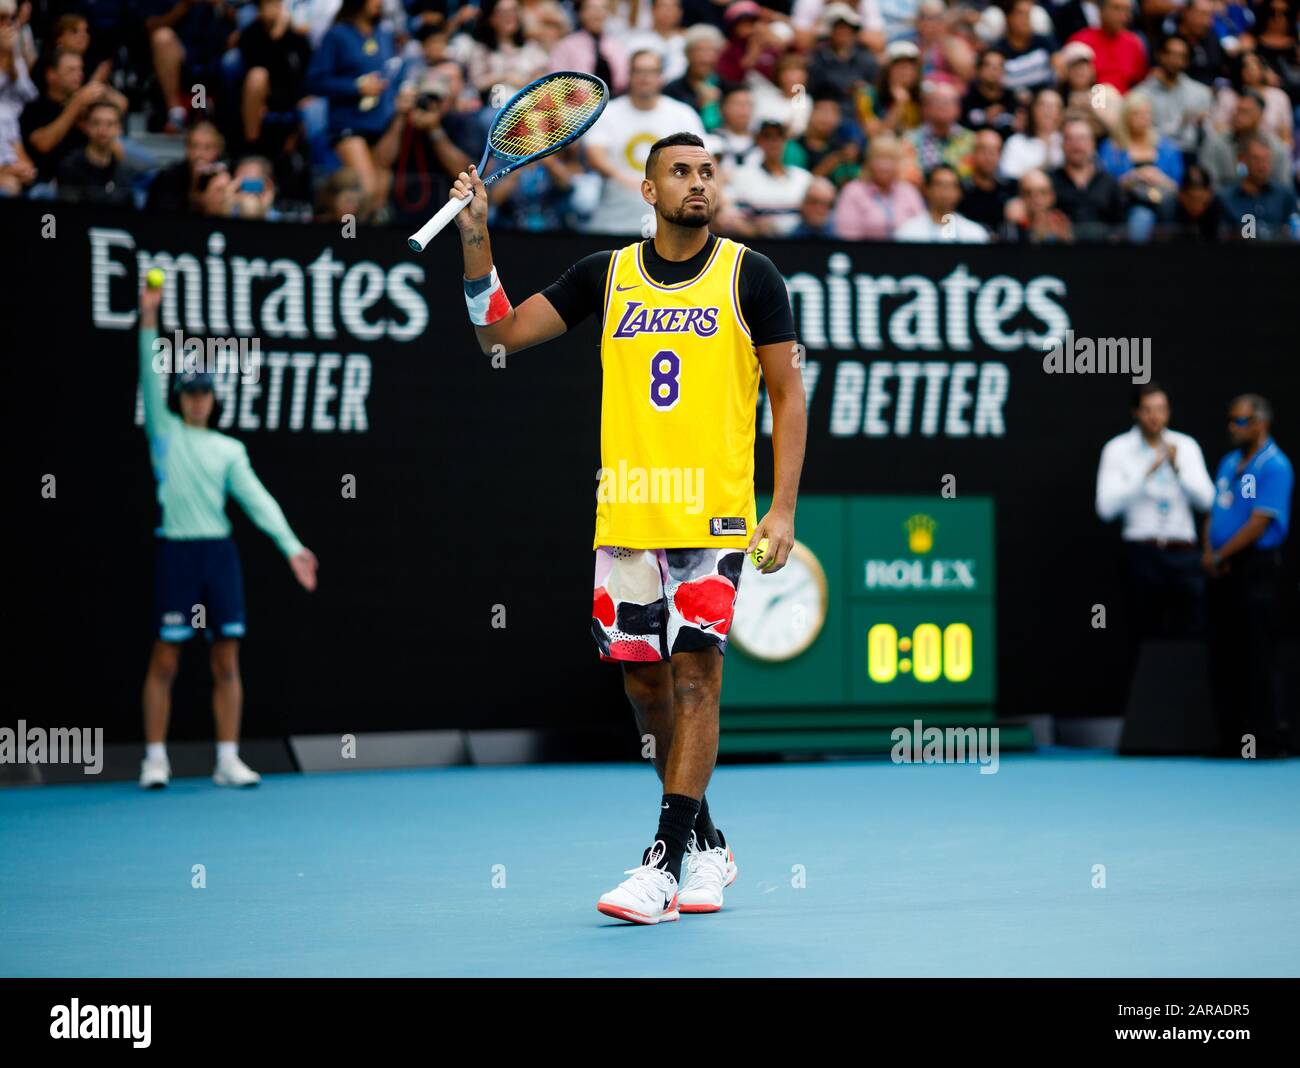 NICK KYRGIOS (AUS) wears a Lakers jersey to commemorate the passing of Kobe Bryant during a warm up session prior to his match against Rafael Nadal. Stock Photo